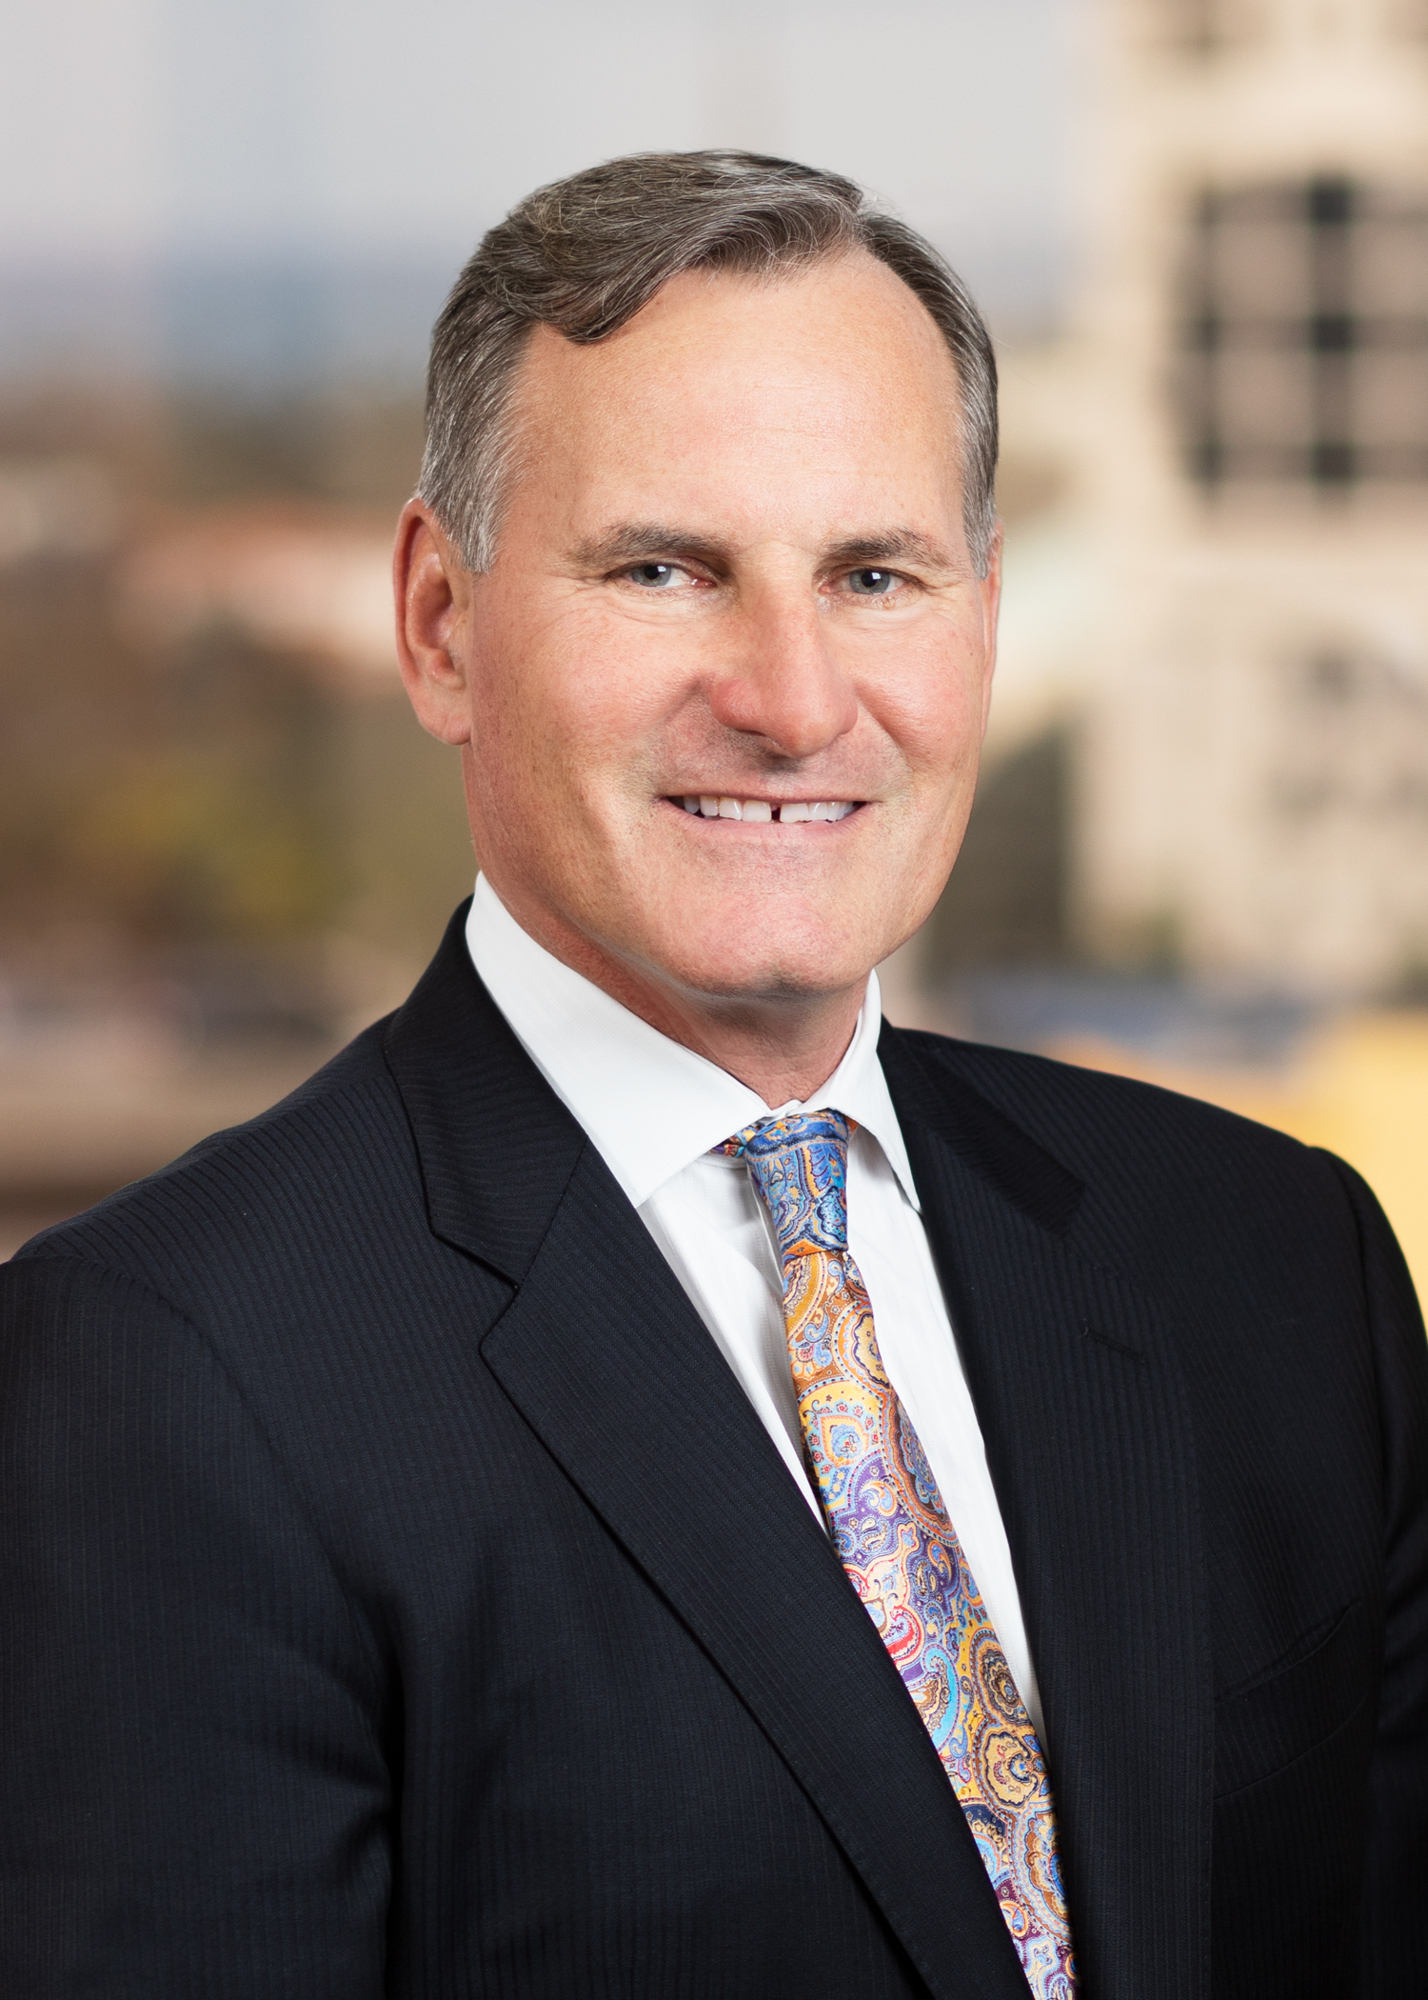 Courtesy. Michael Taaffe was recently named chair of financial services business sector at Shumaker.